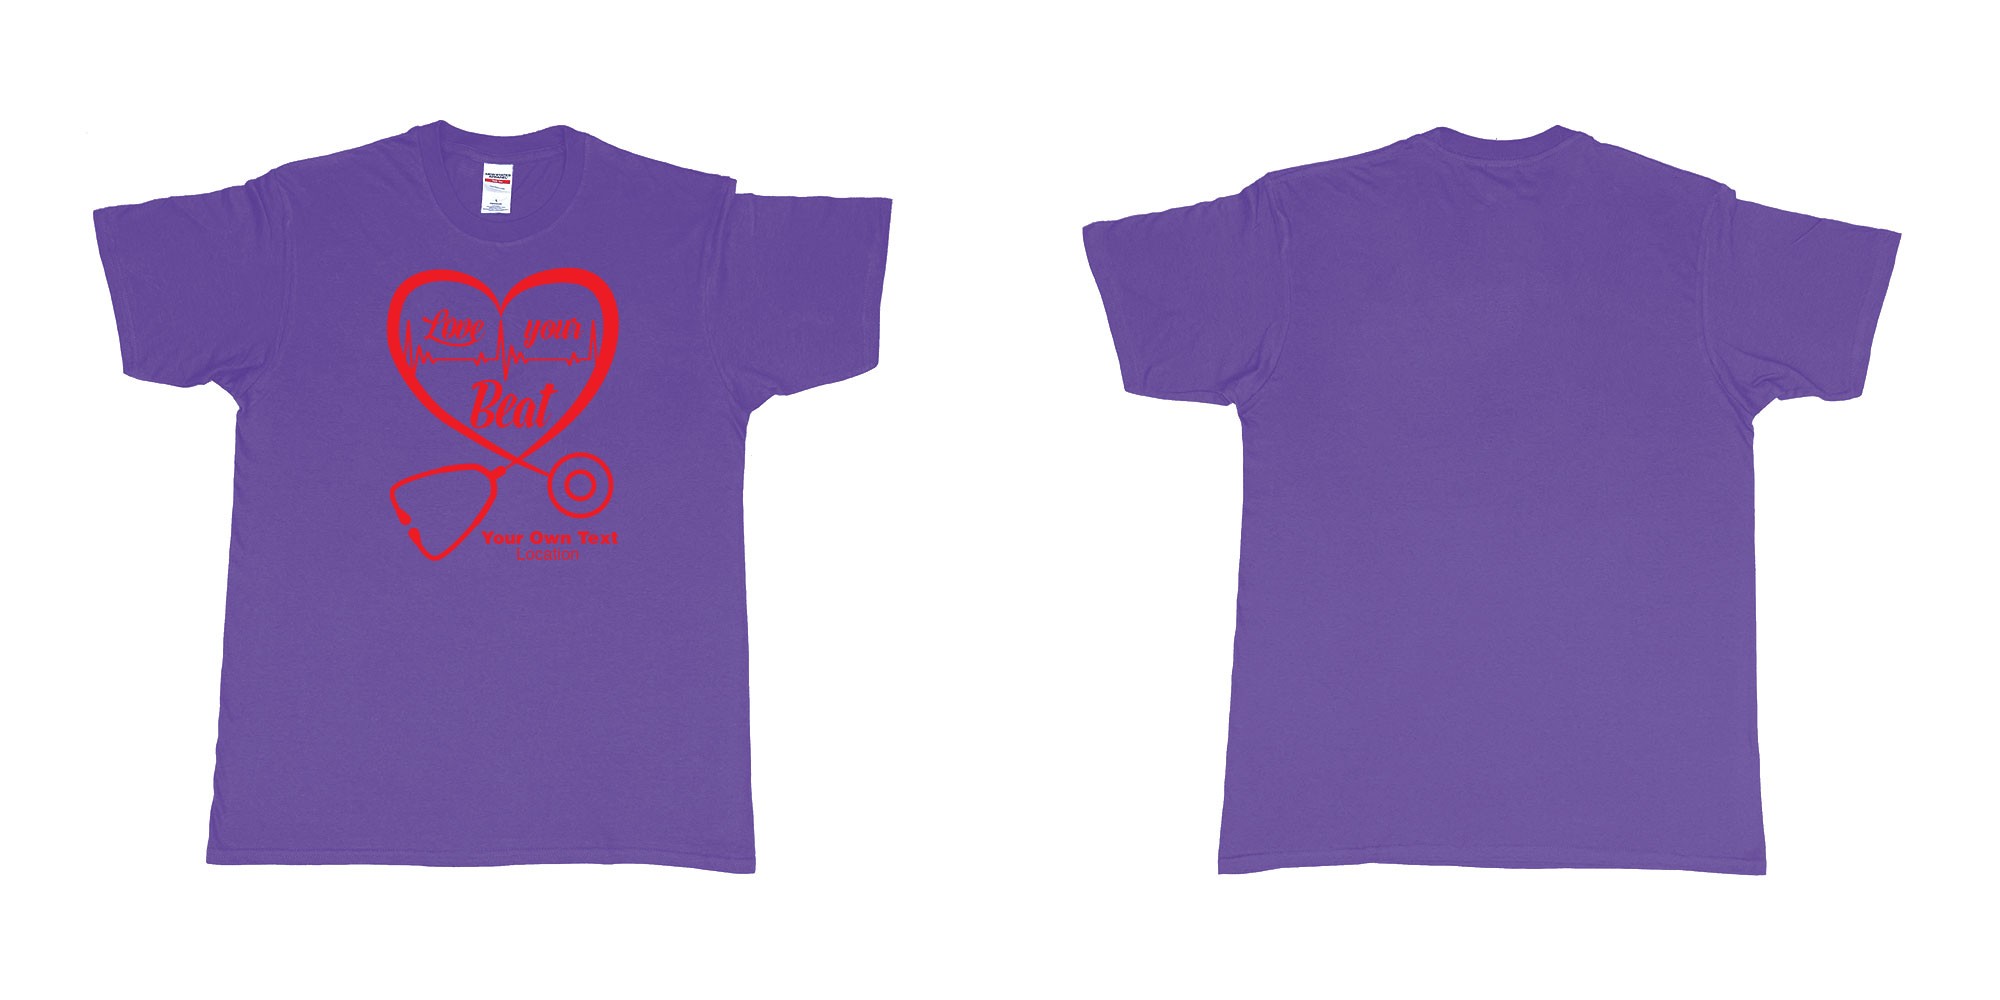 Custom tshirt design stethoscope doctor love your beat hearth custom tshirt print in fabric color purple choice your own text made in Bali by The Pirate Way